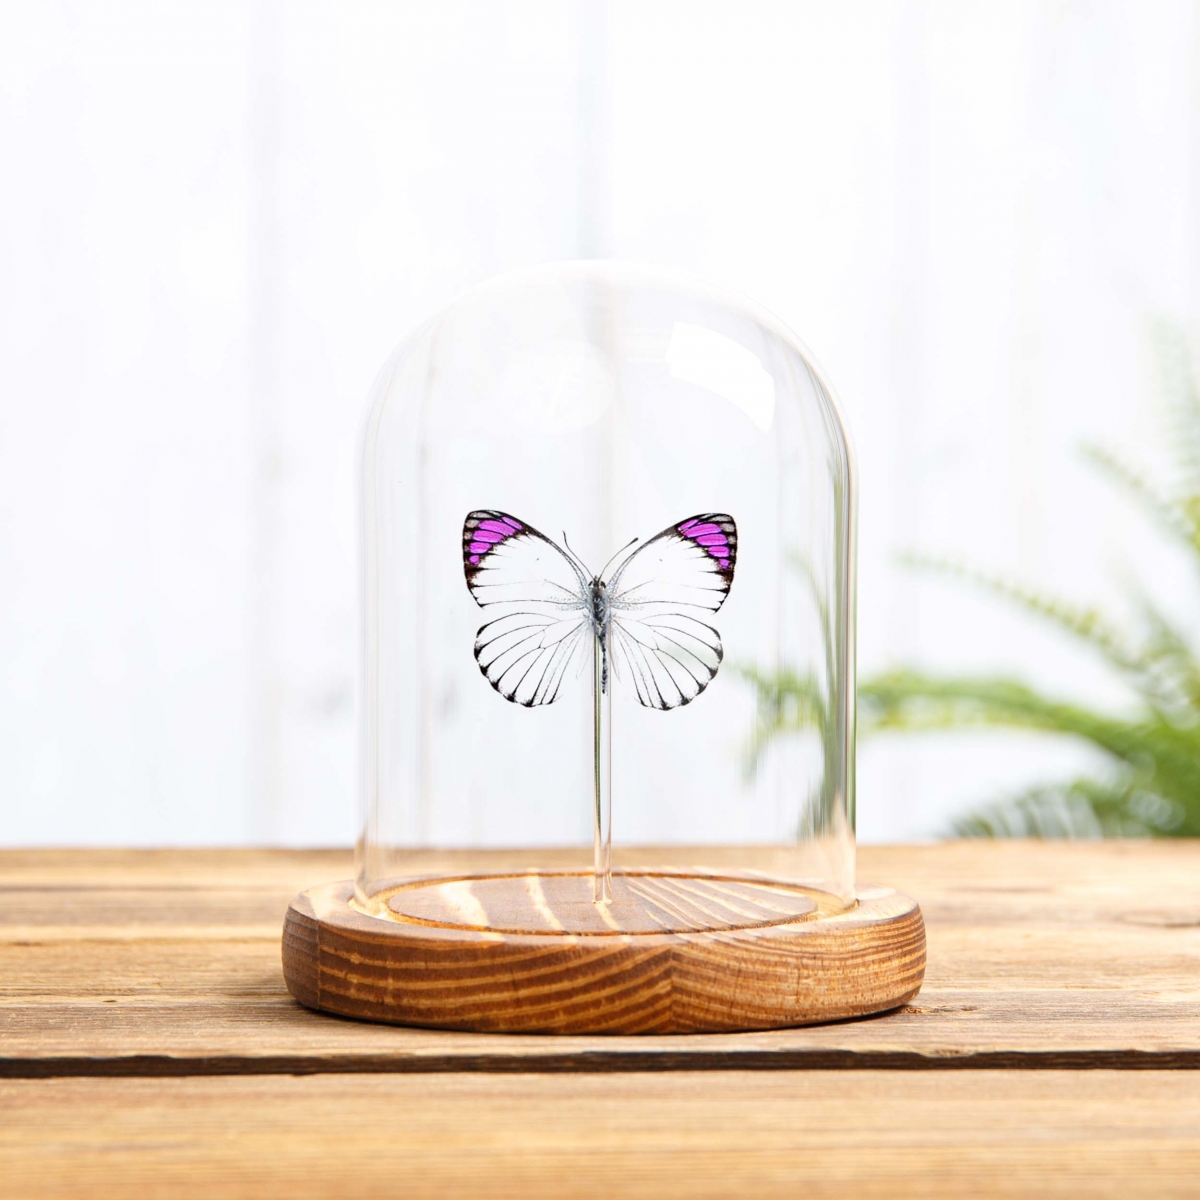 Bushveld Purple Tip Butterfly in Glass Dome with Wooden Base (Colotis ione)